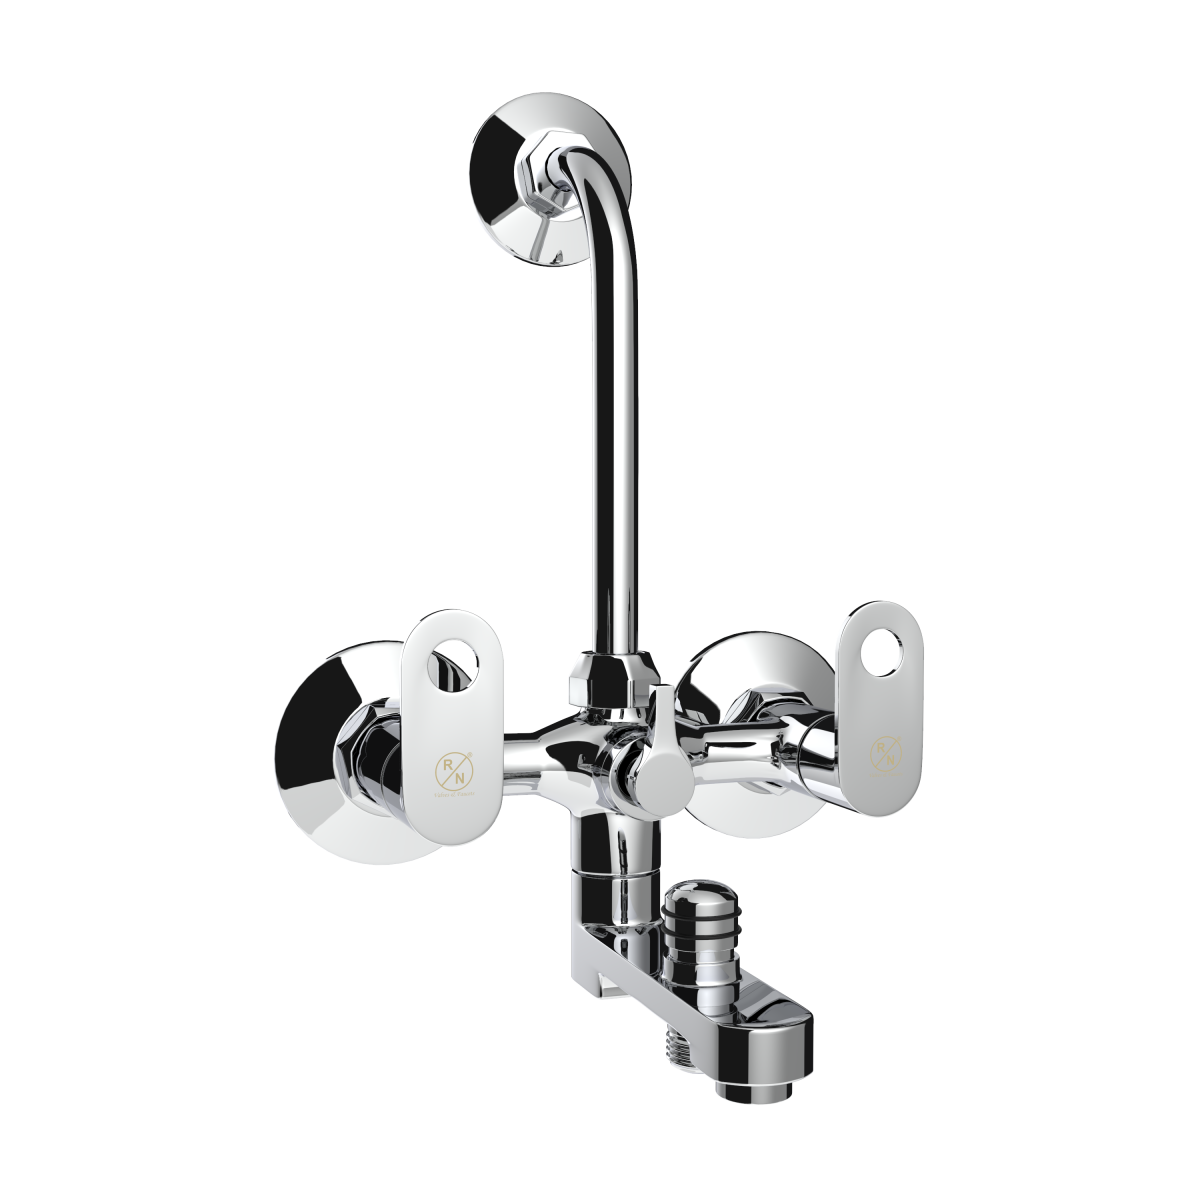 Wall Mixer Telephonic 3 In 1 With L Bend